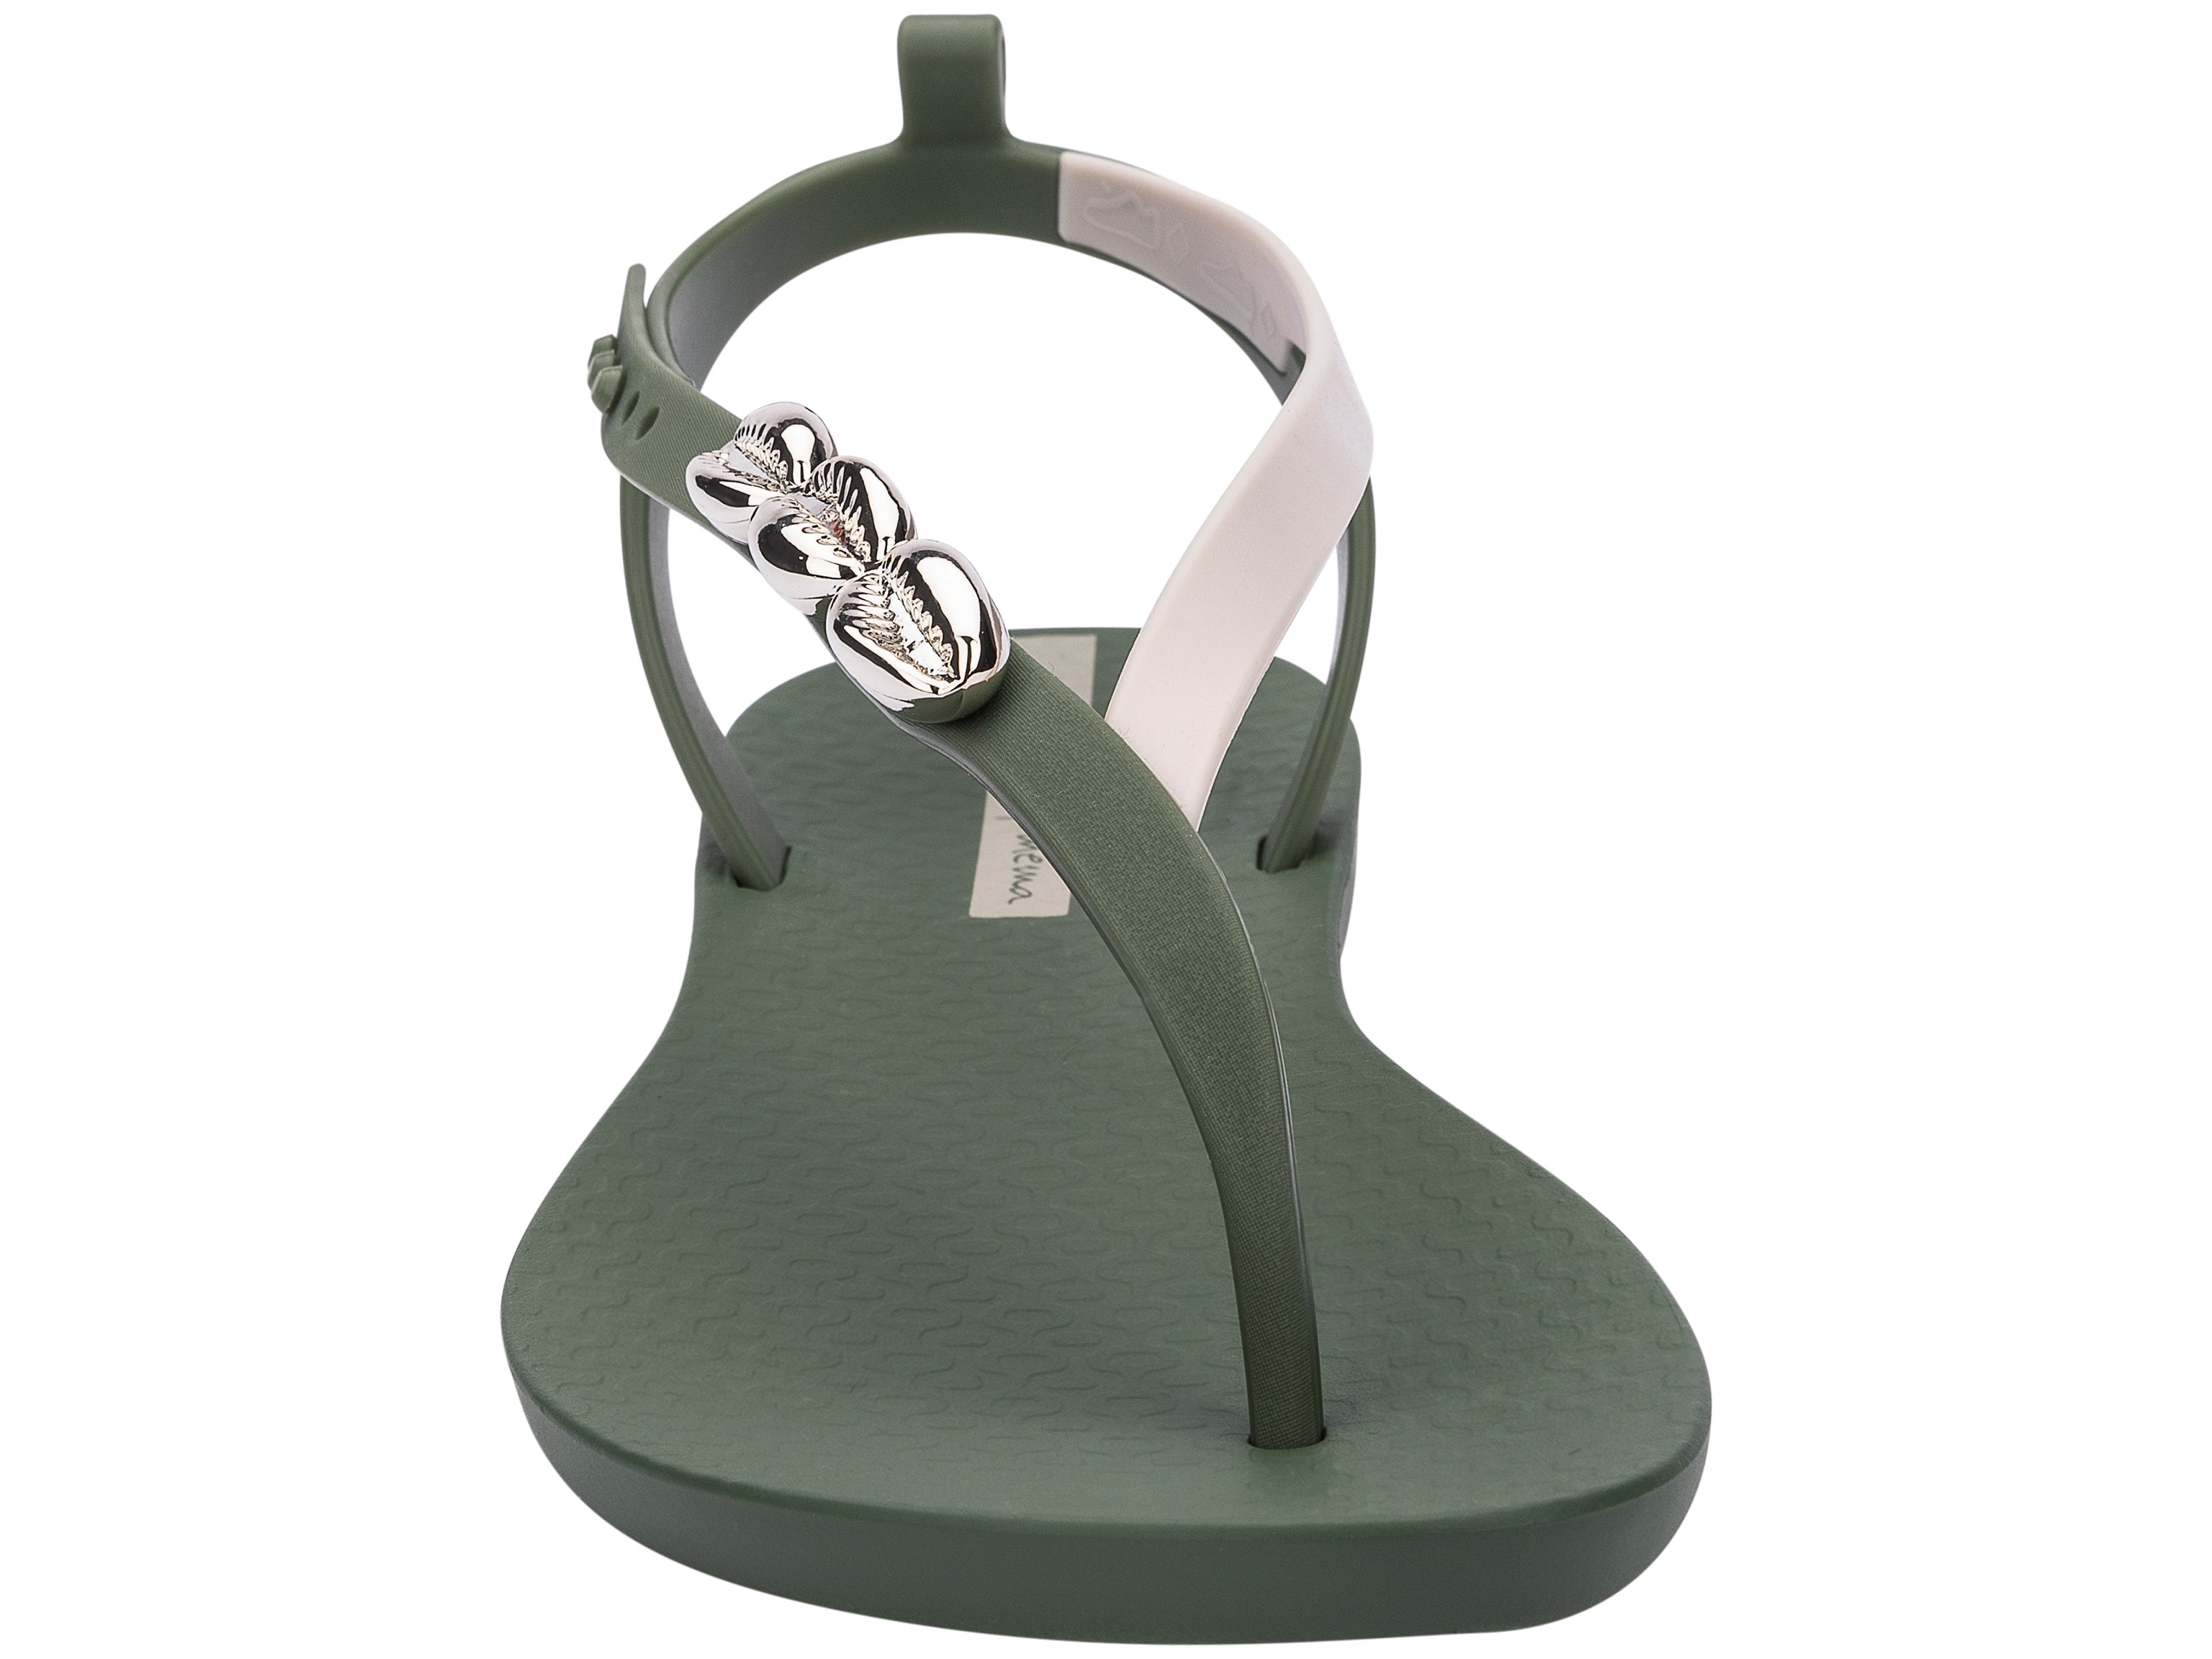 Front view of a green Ipanema Salty women's sandal with 3 silver shells on the strap.